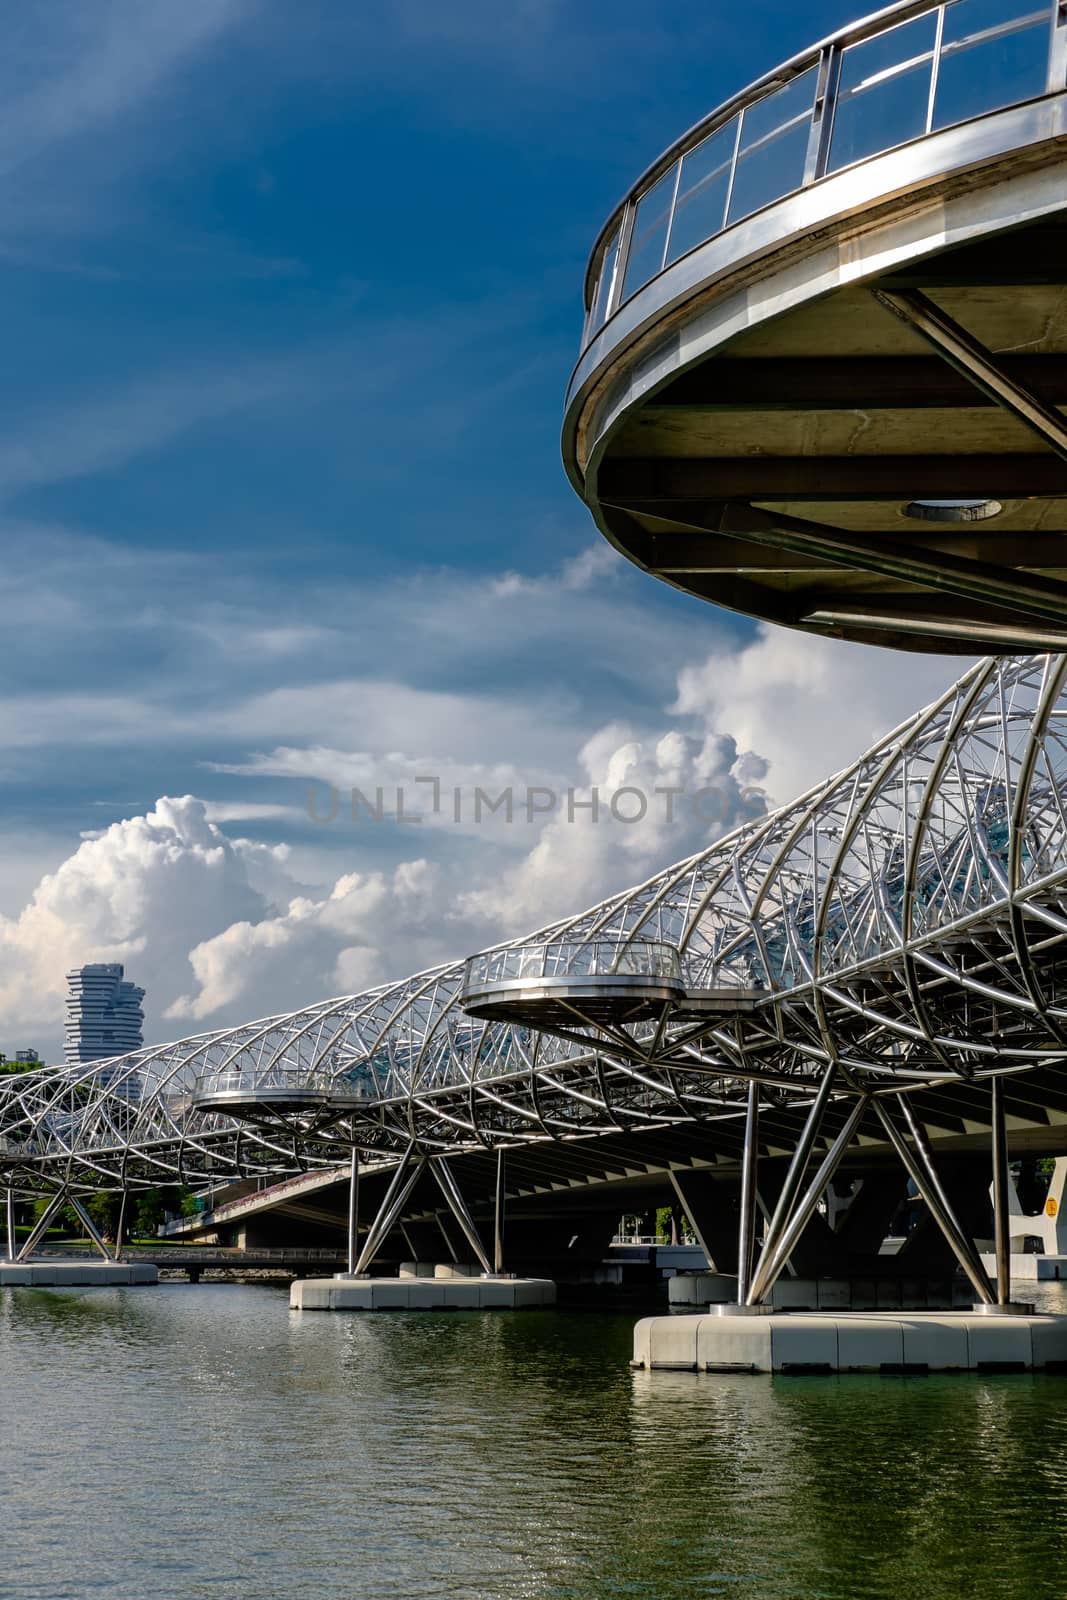 Helix Bridge at sunlight with clouds in the background in Singap by rainfallsup